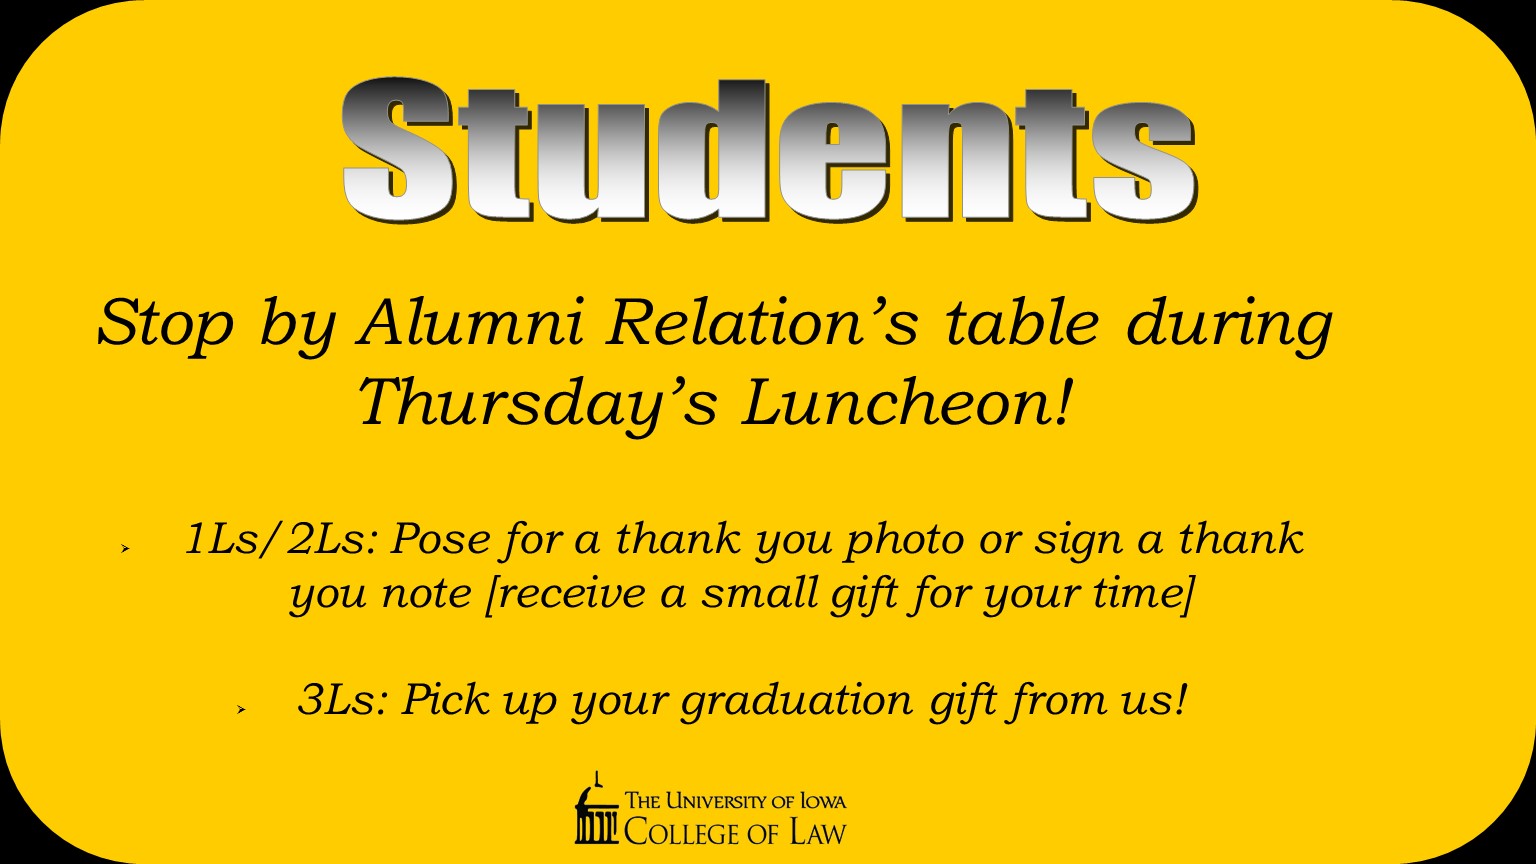 Stop by Alumni Relation’s table during Thursday’s Luncheon!  1Ls/2Ls: Pose for a thank you photo or sign a thank you note [receive a small gift for your time]  3Ls: Pick up your graduation gift from us!